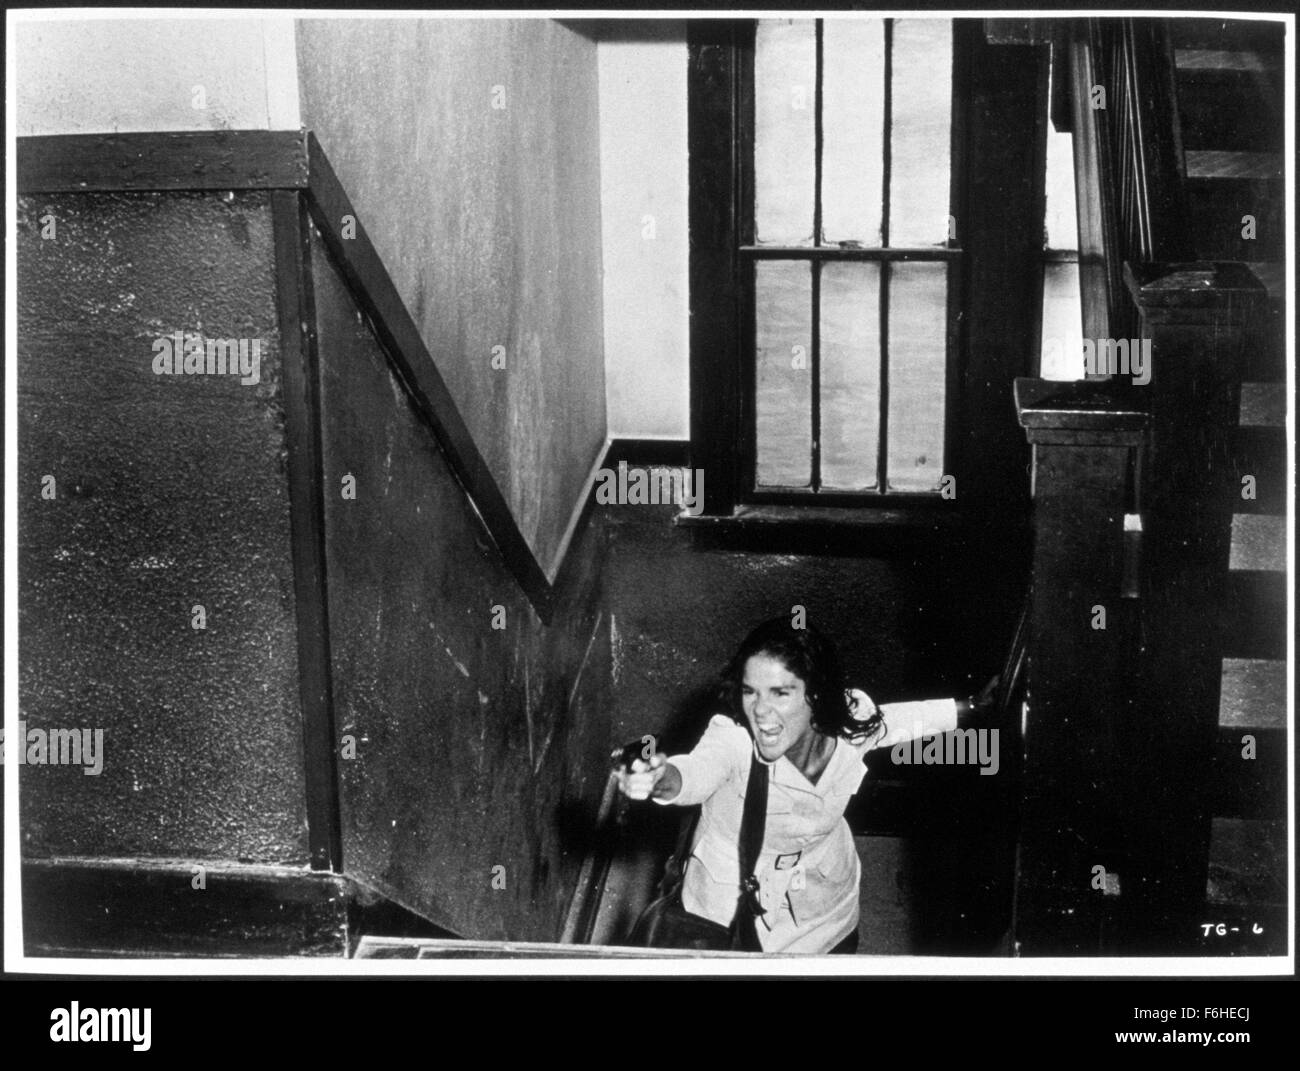 1972, Film Title: GETAWAY, Director: SAM PECKINPAH, Studio: FIRST ARTISTS, Pictured: GUN CRAZY, HAND GUN, ALI MacGRAW, WEAPONS, WOMEN (EVIL/MEAN/DANGEROUS), STAIRS, STAIRWELL, ANGRY, VIOLENT, RAGE, ATTACKING, RUNNING. (Credit Image: SNAP) Stock Photo